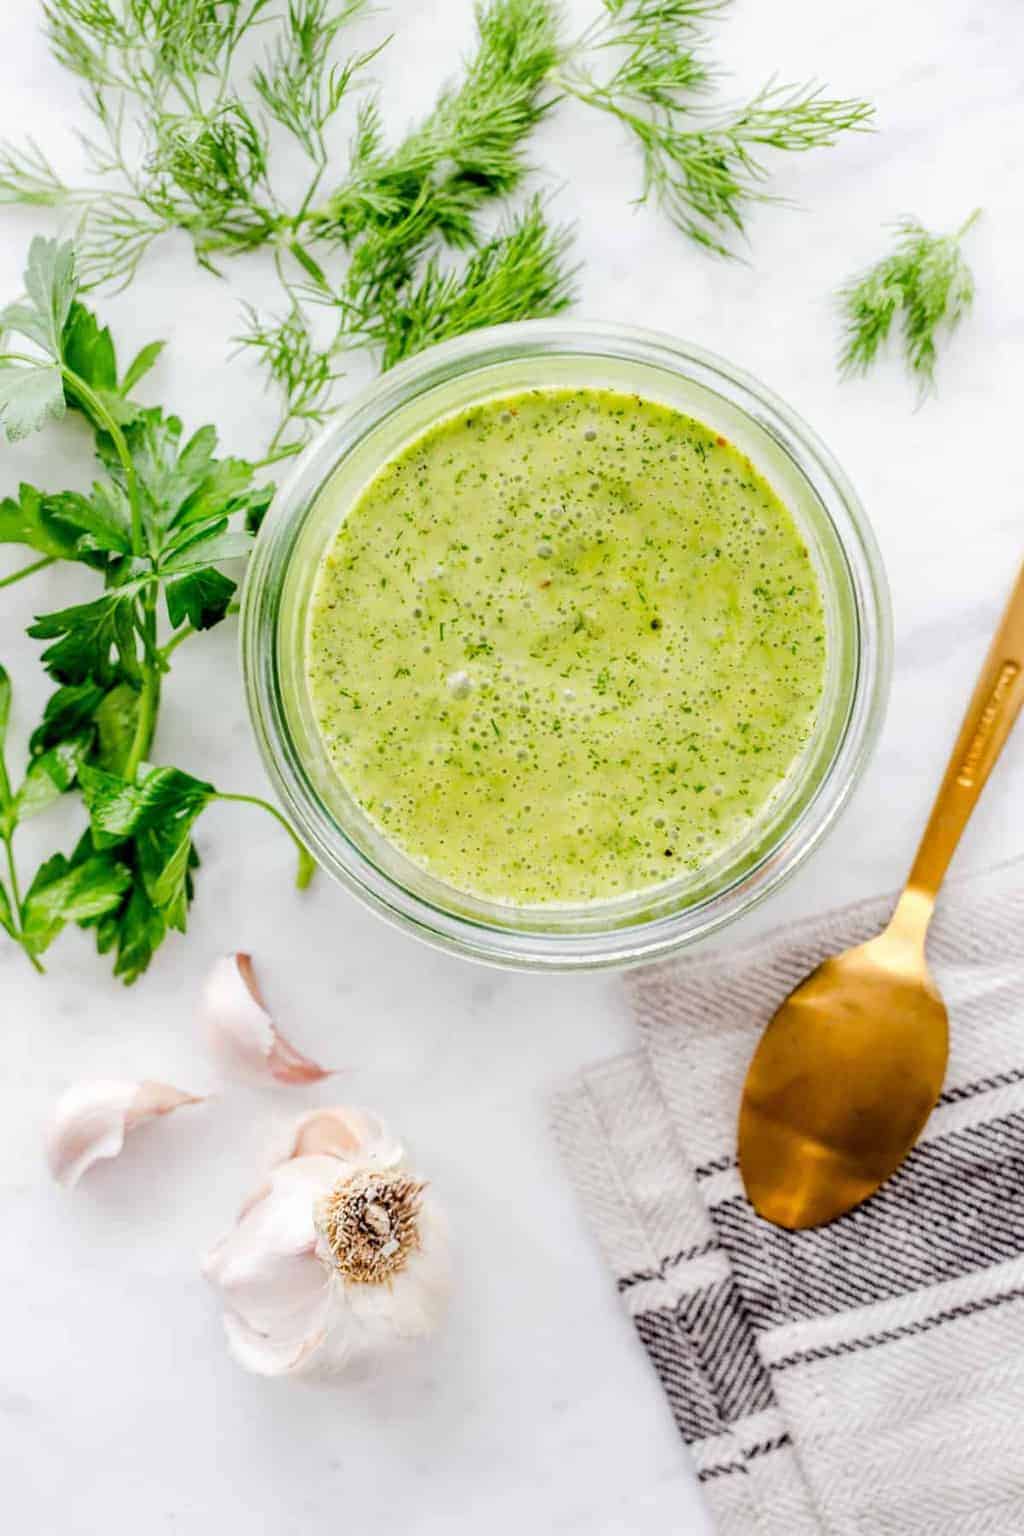 Make This Garlic Herb Sauce + Use It For a Week's Worth of Dinners